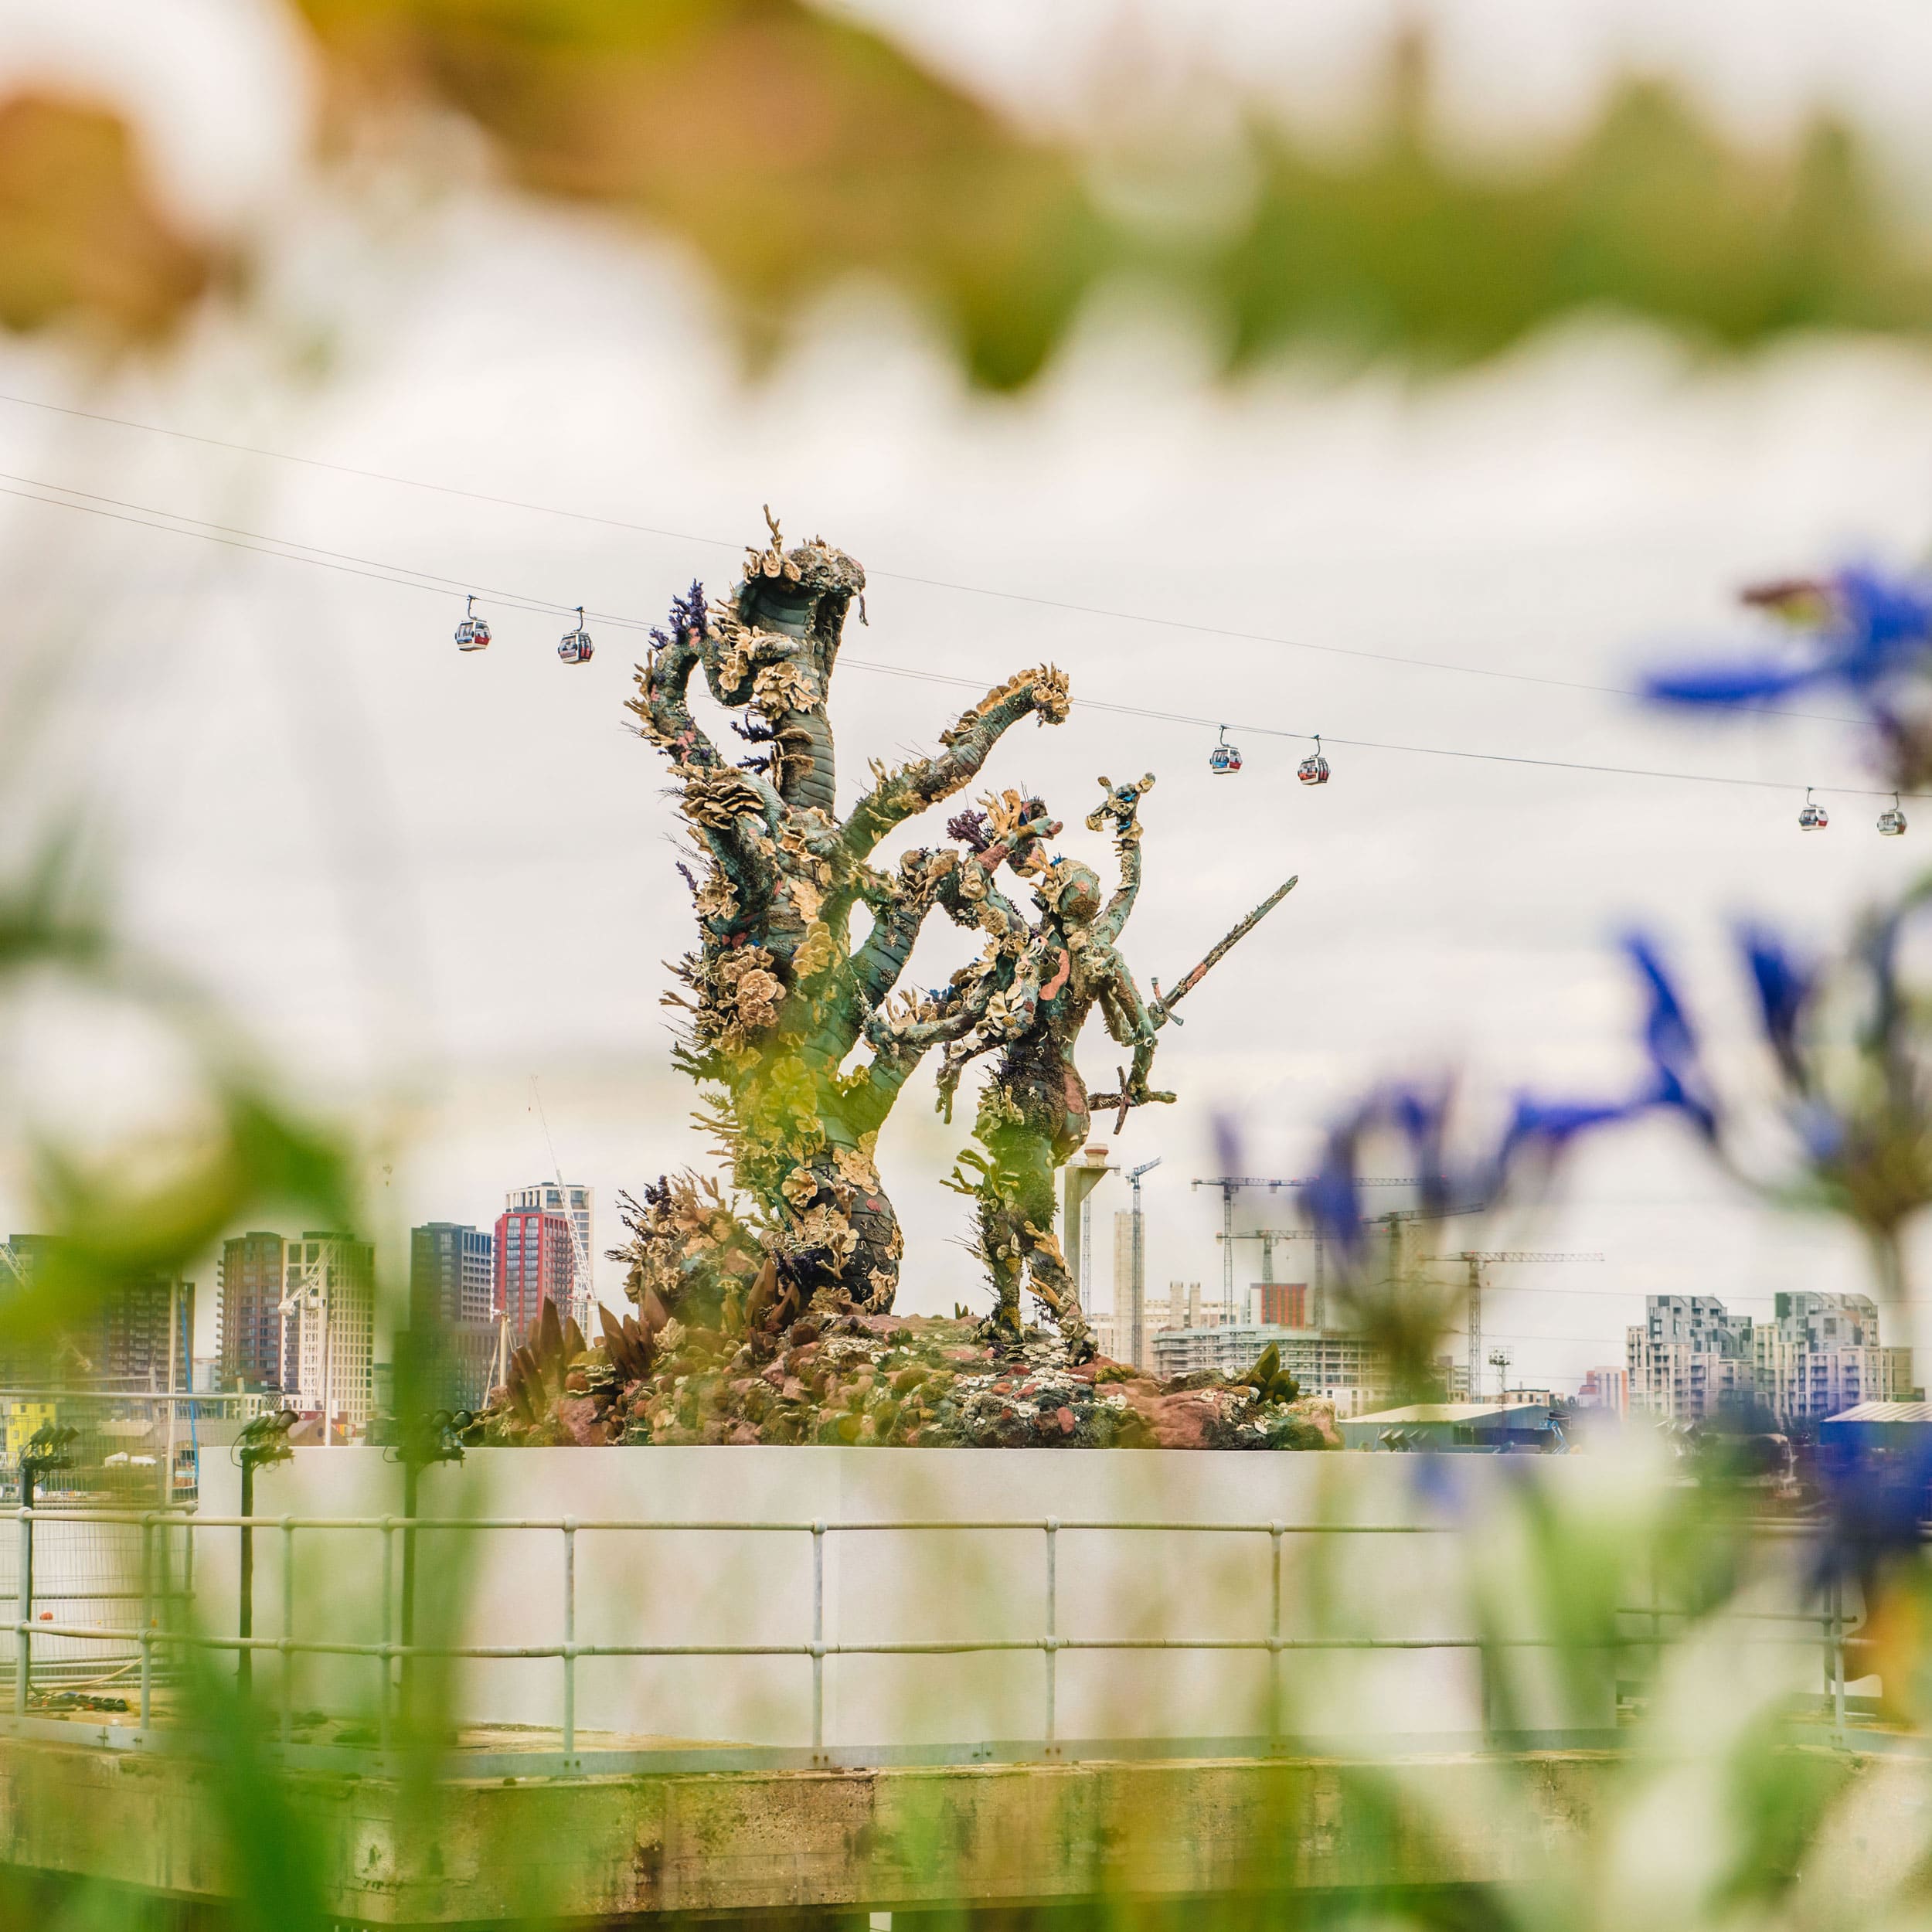 Closeup view of statues in the Greenwich Peninsula park with leaves and flowers surrounding the frame.